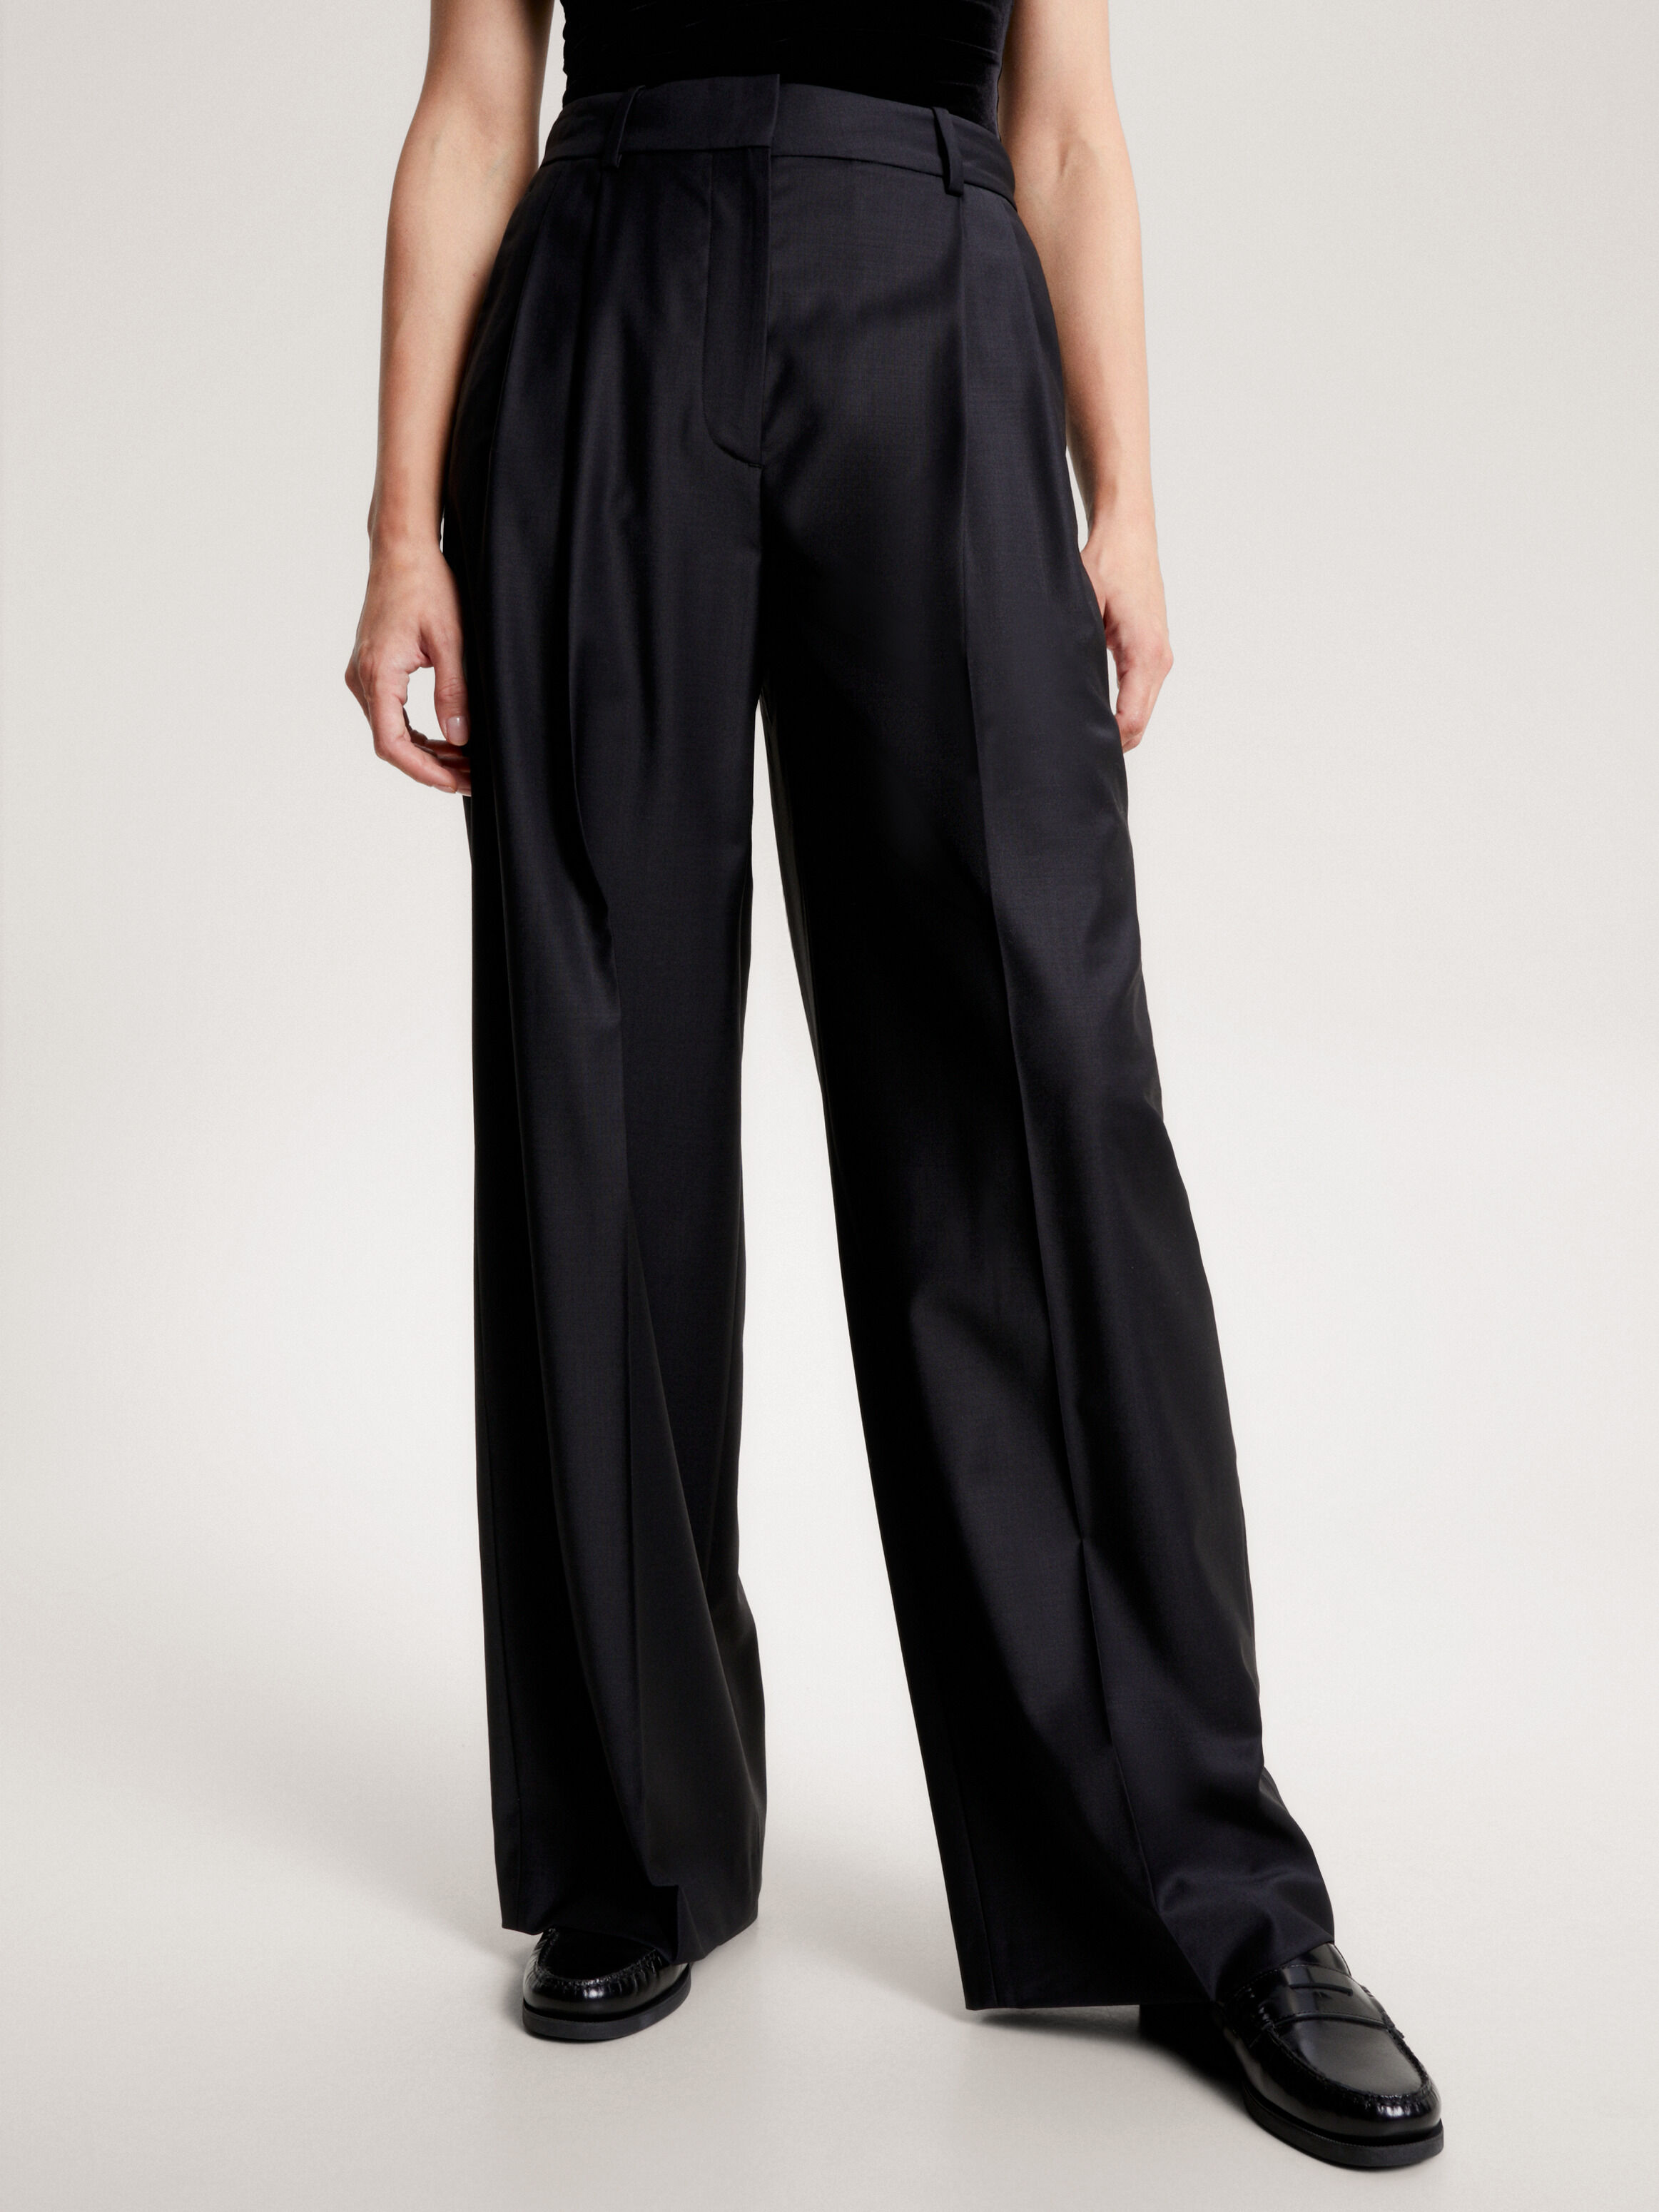 Women's Trousers | Tommy Hilfiger Malaysia